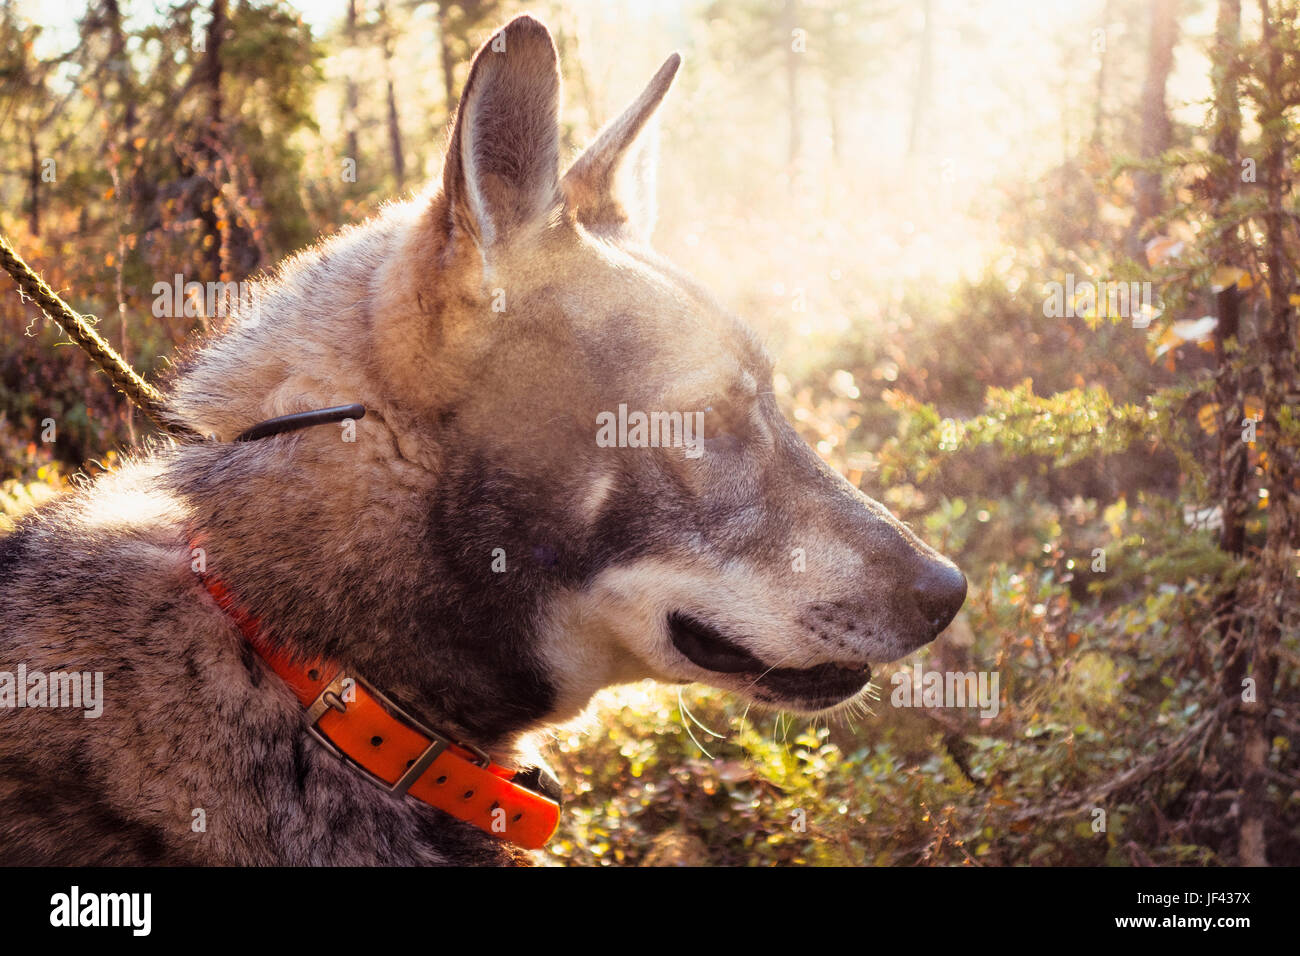 Hunting dog in forest Stock Photo